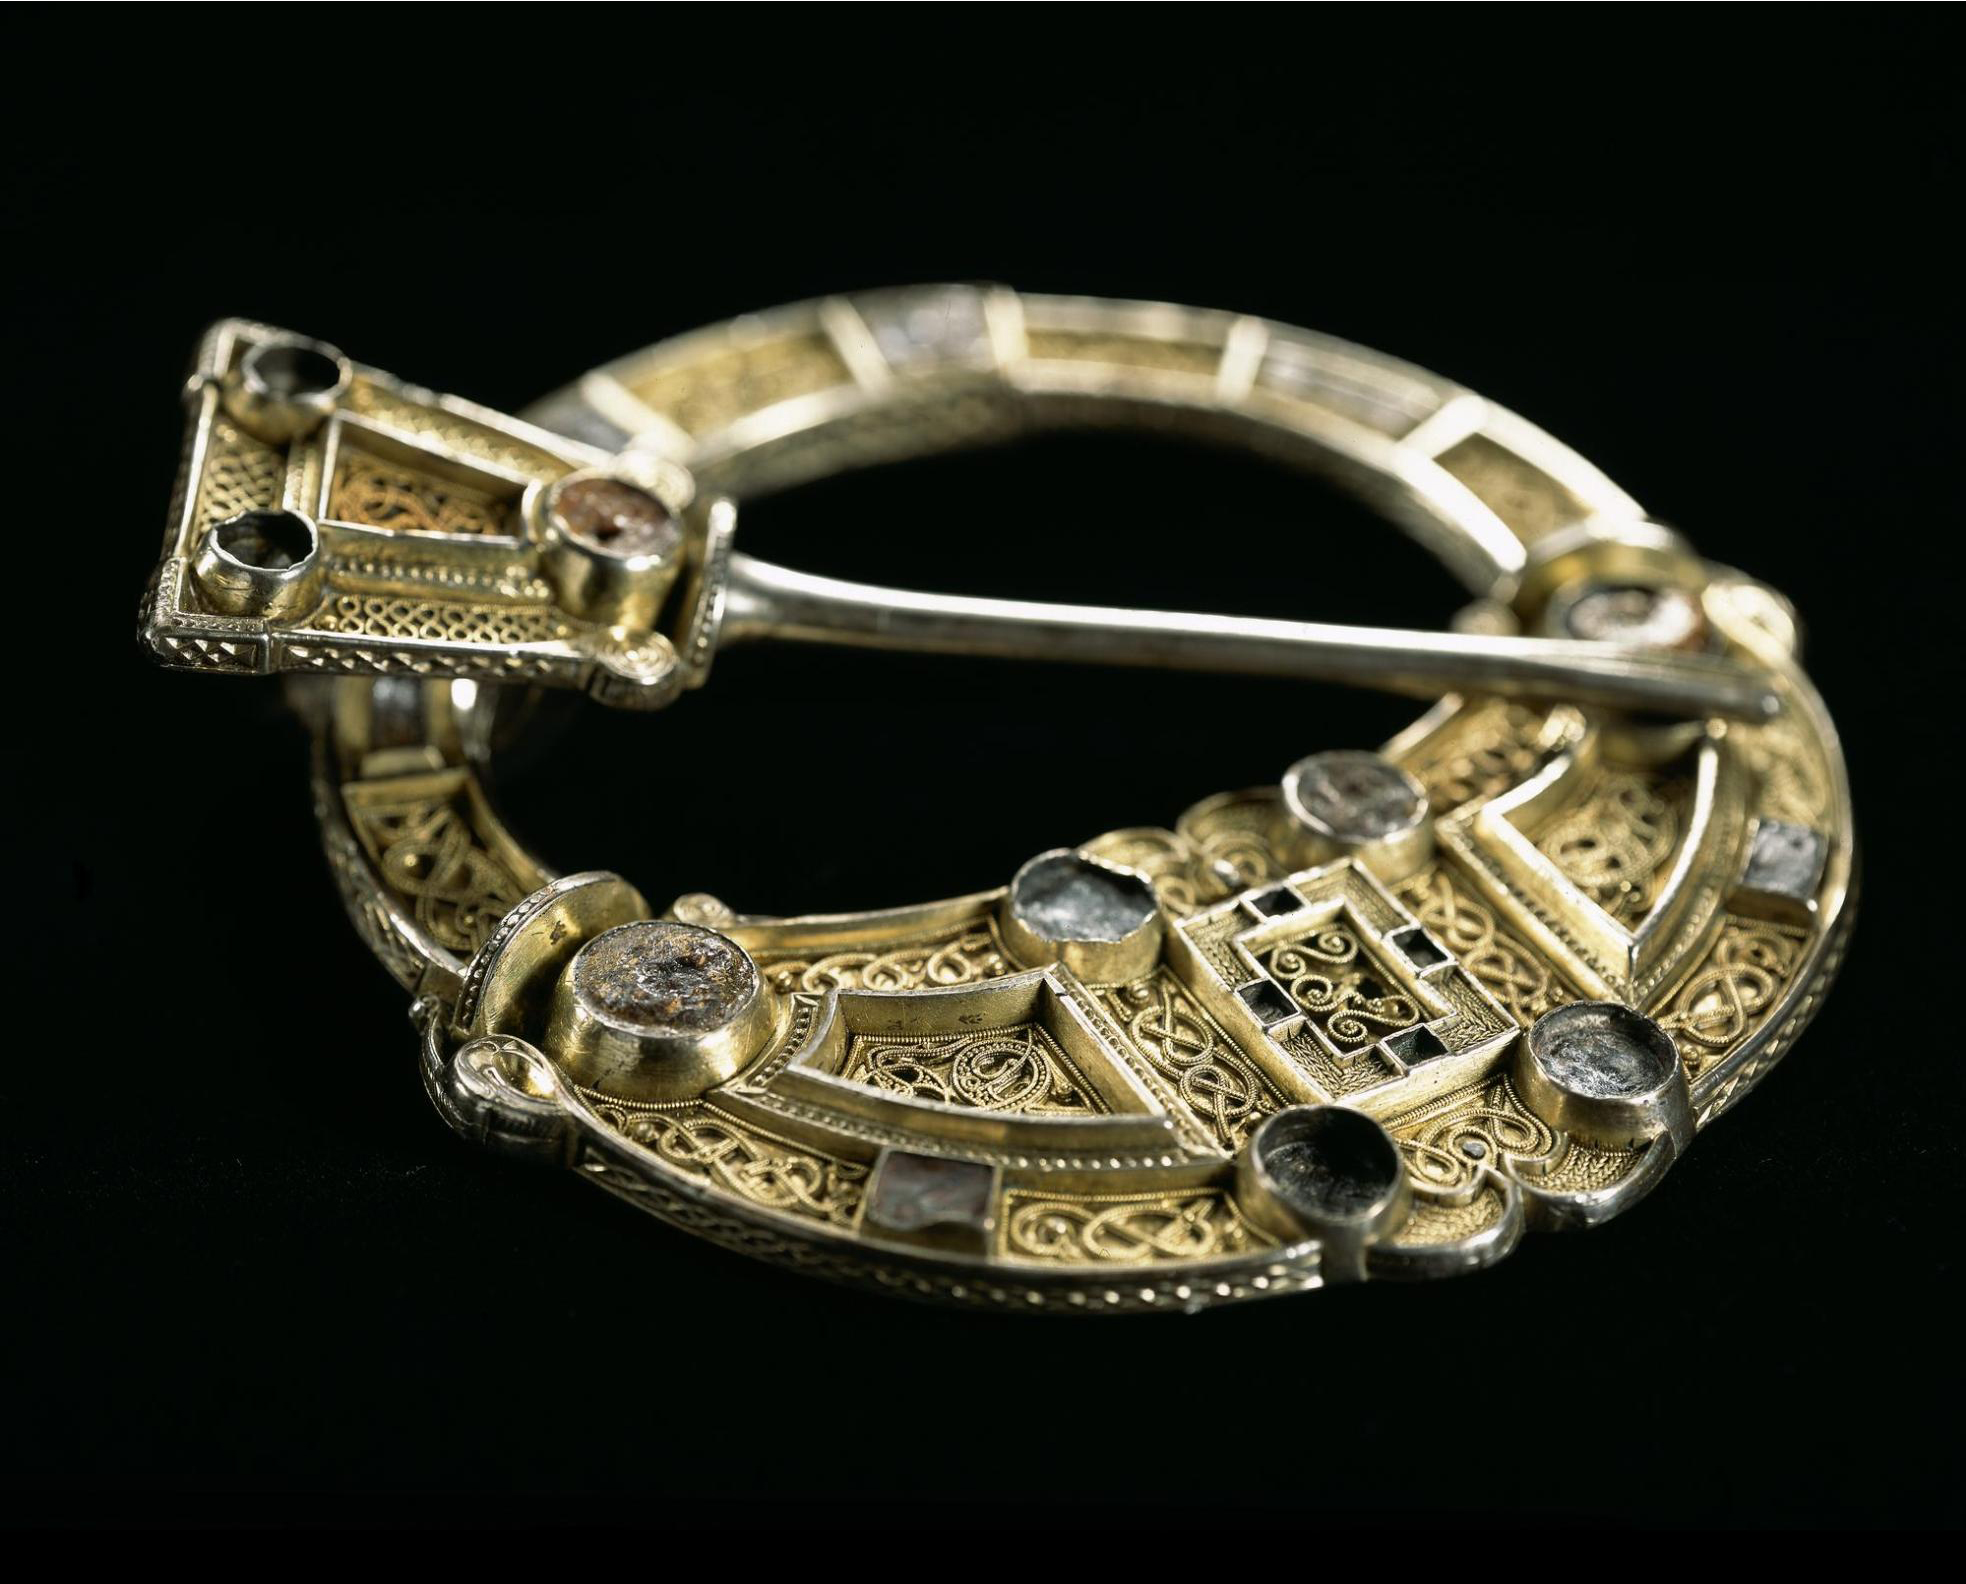 Hunterston Brooch, an early Christian brooch with panels of gold filigree in Celtic and Anglo-Saxon styles, c. 700 AD.